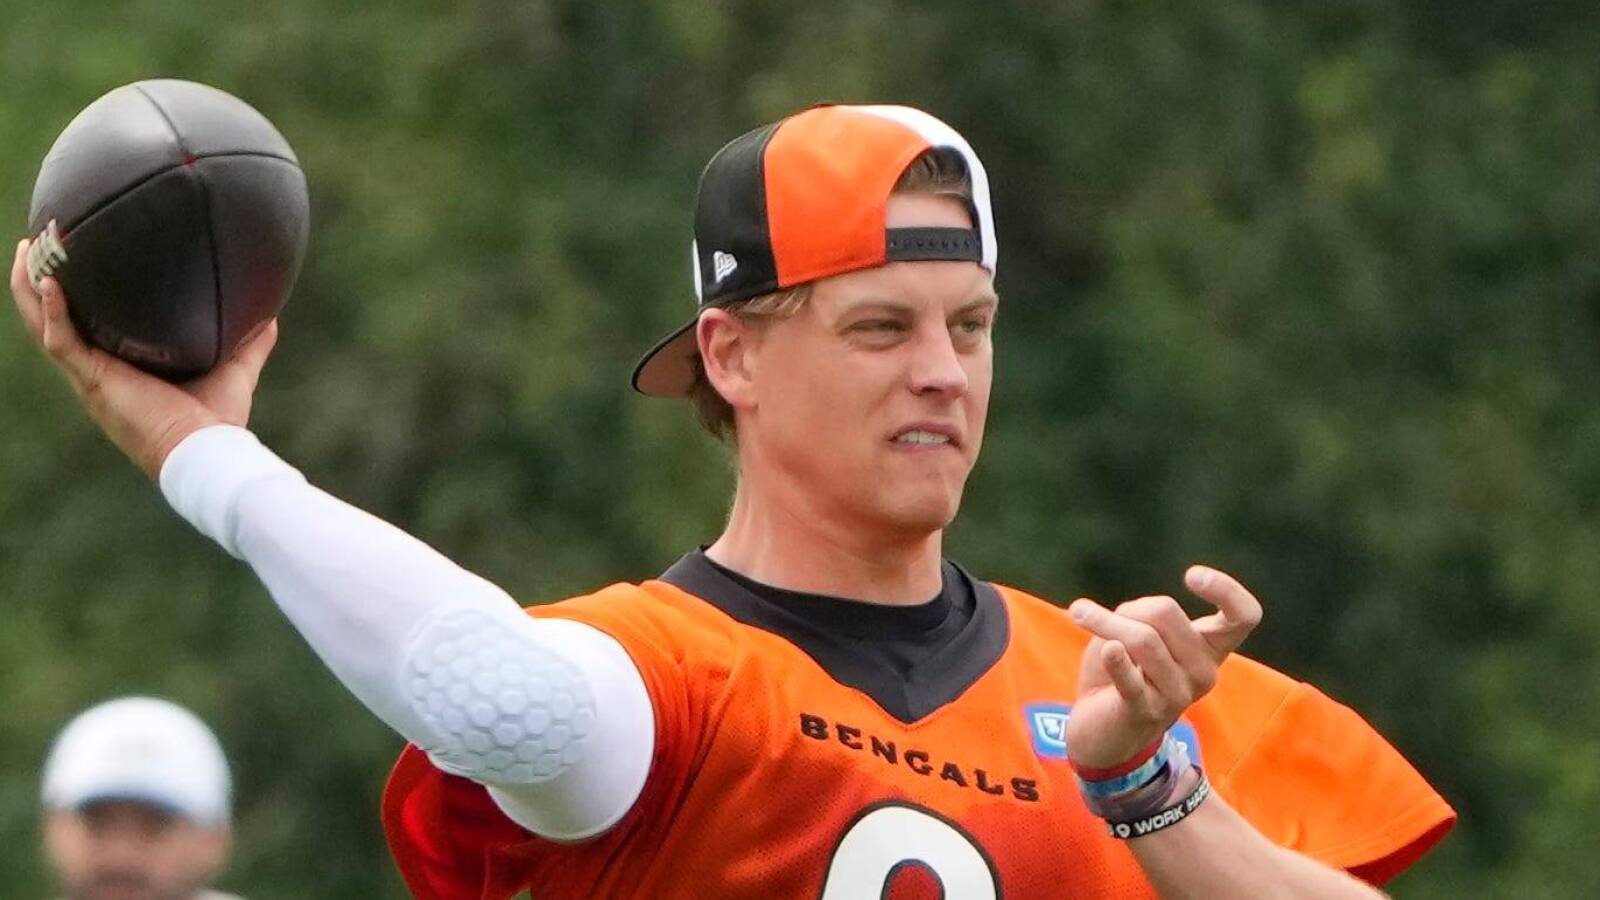 Joe Burrow shares 'support' for Bengals who requested trades